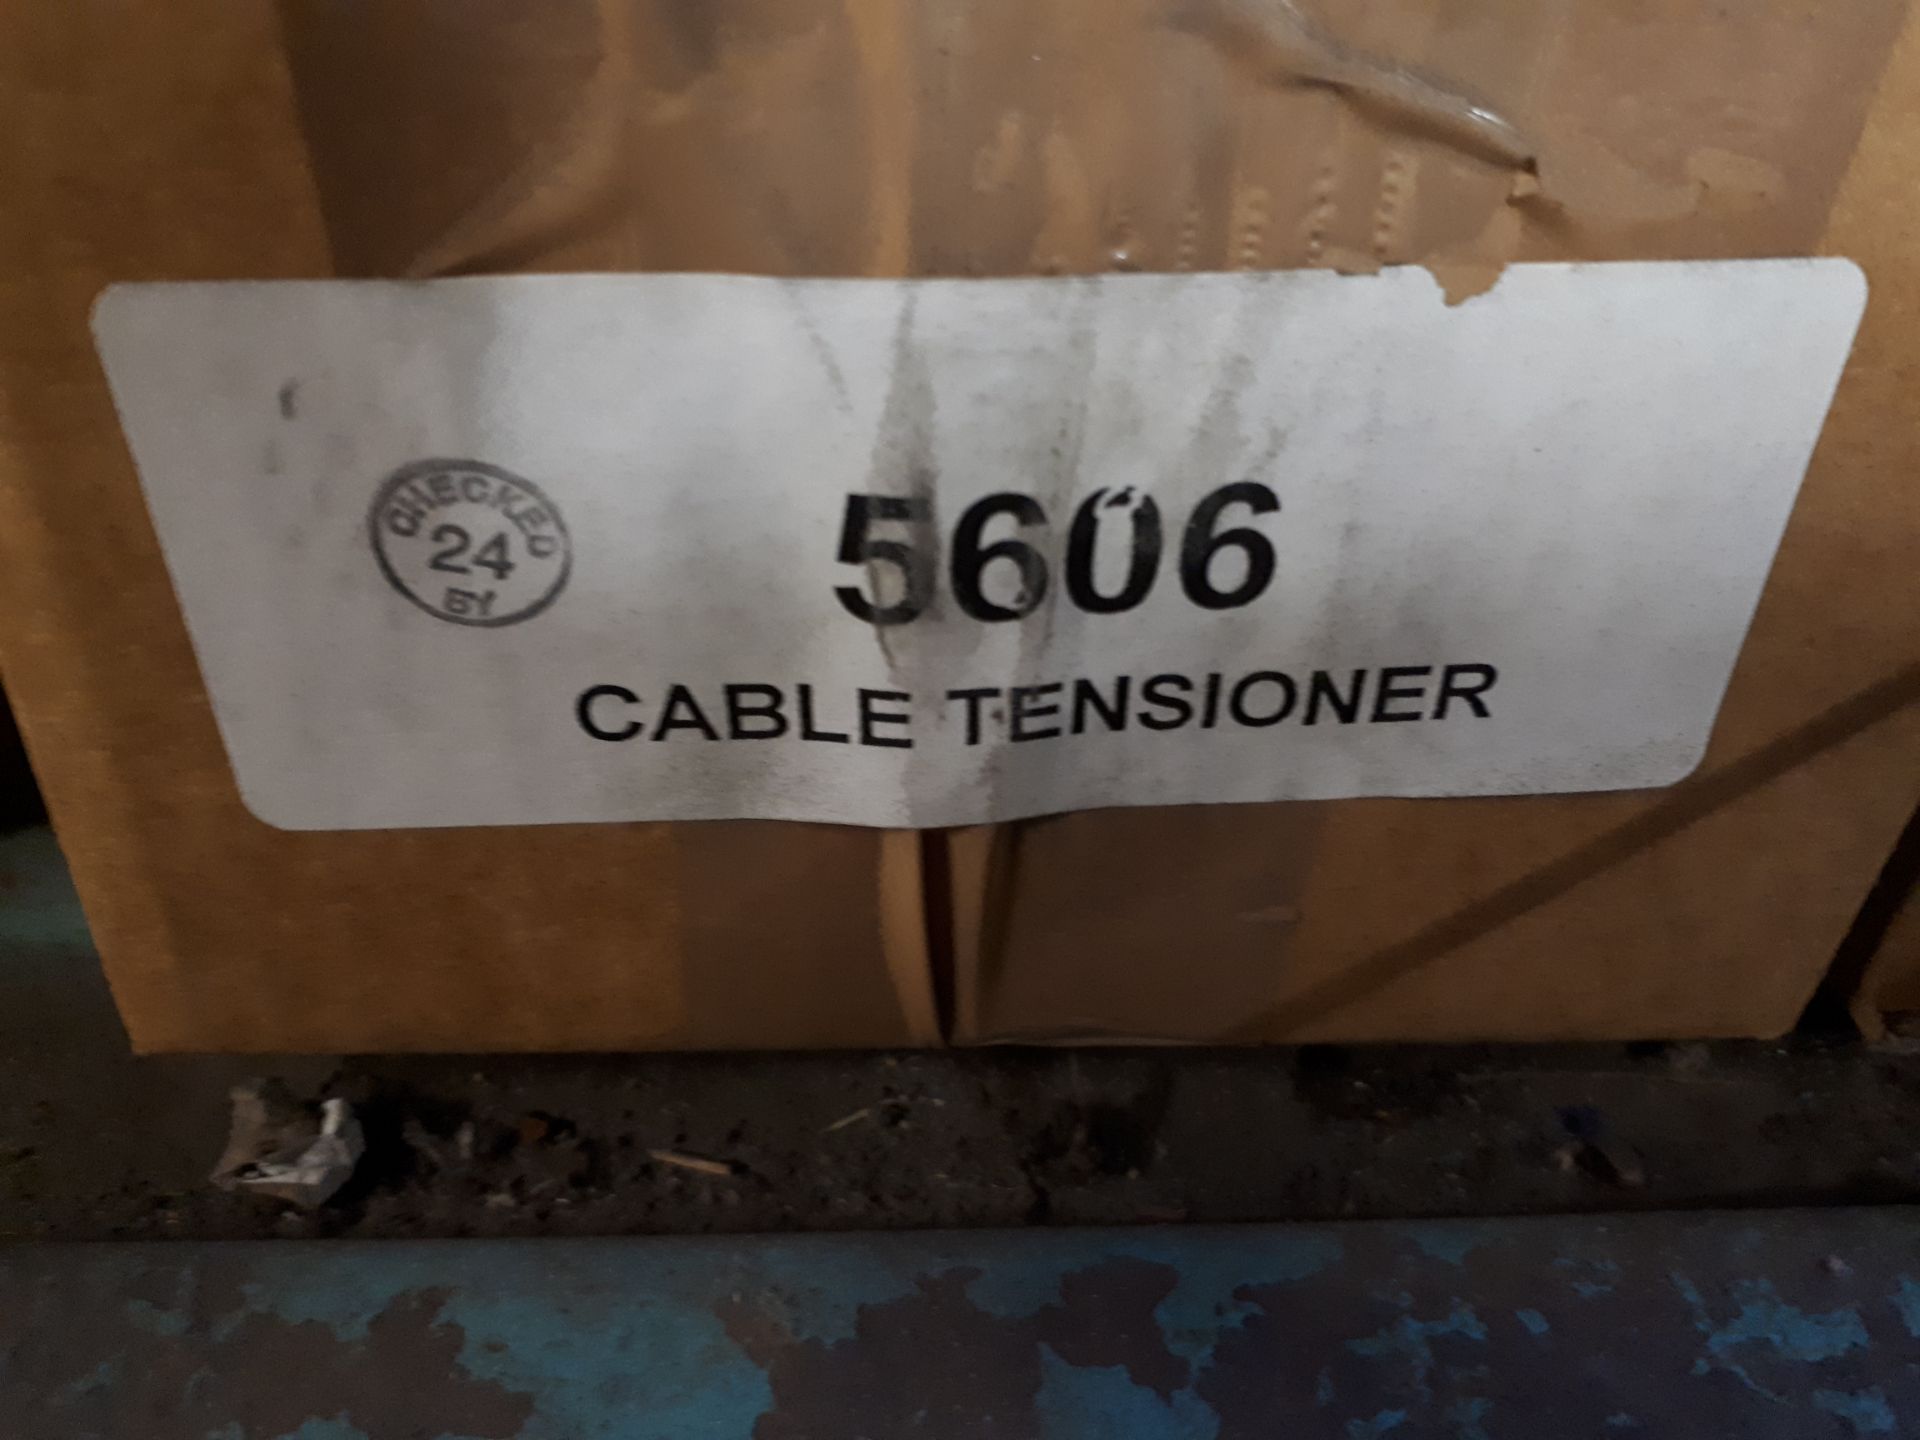 (41) Cable Tensioner, Part no. 5606 - Image 2 of 2